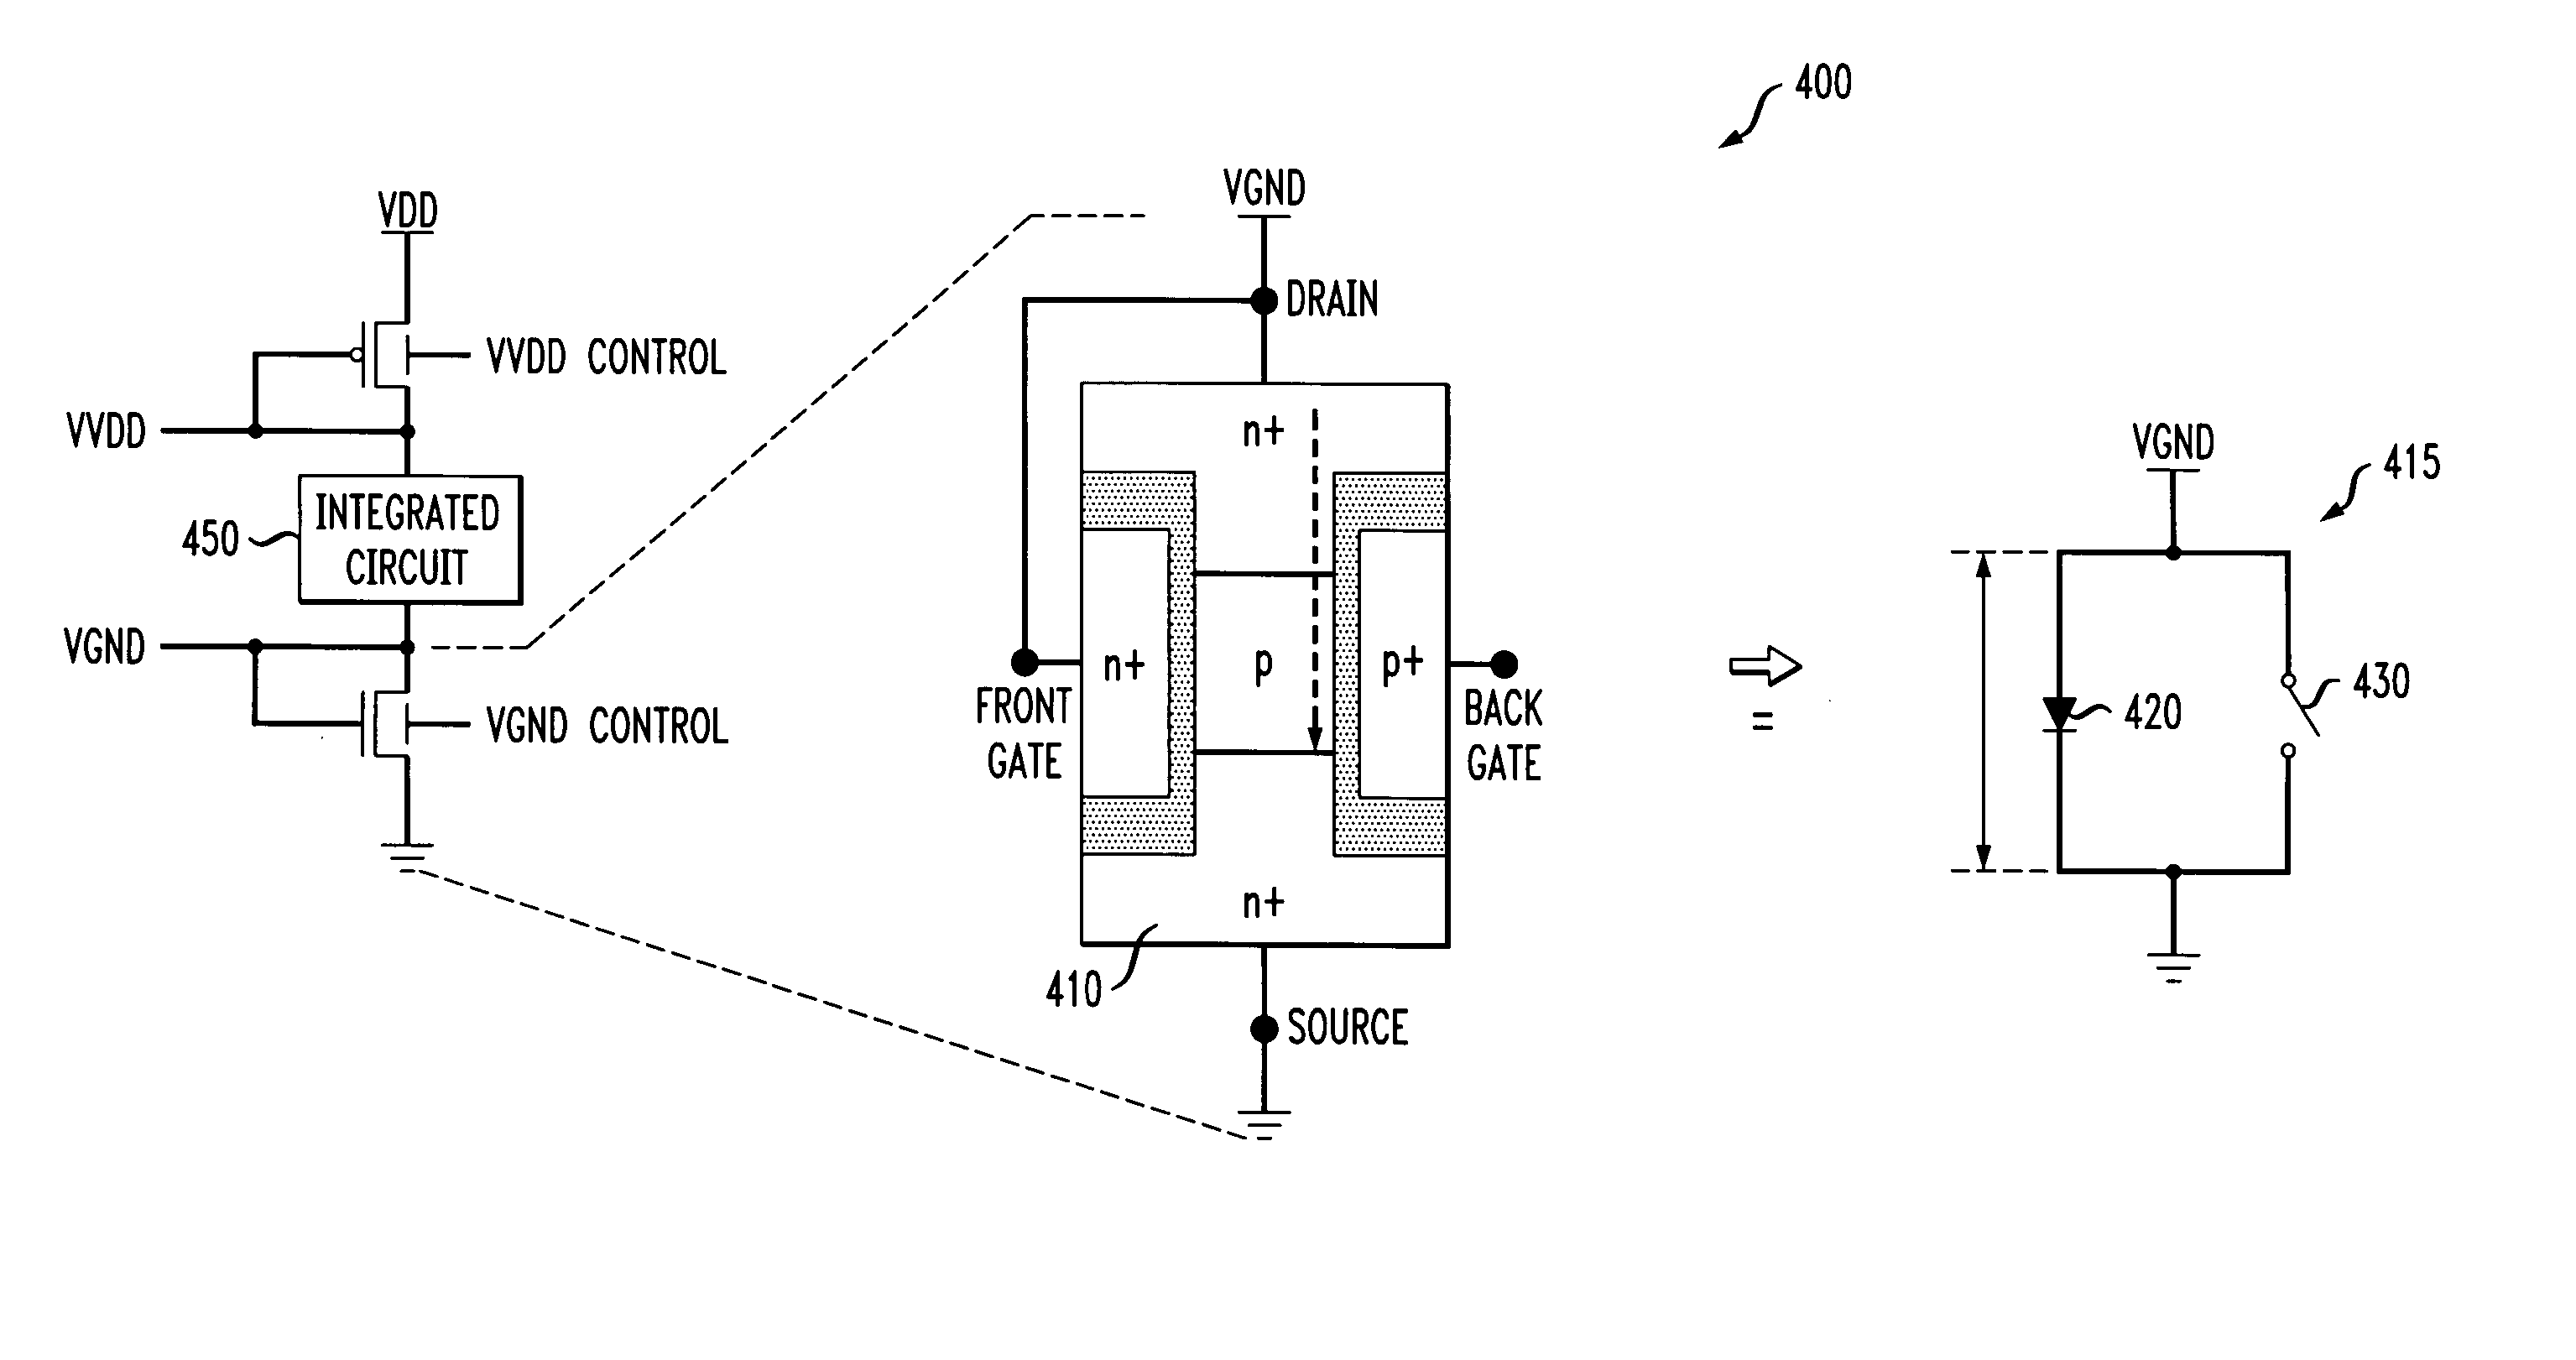 Methods and apparatus for varying a supply voltage or reference voltage using independent control of diode voltage in asymmetrical double-gate devices